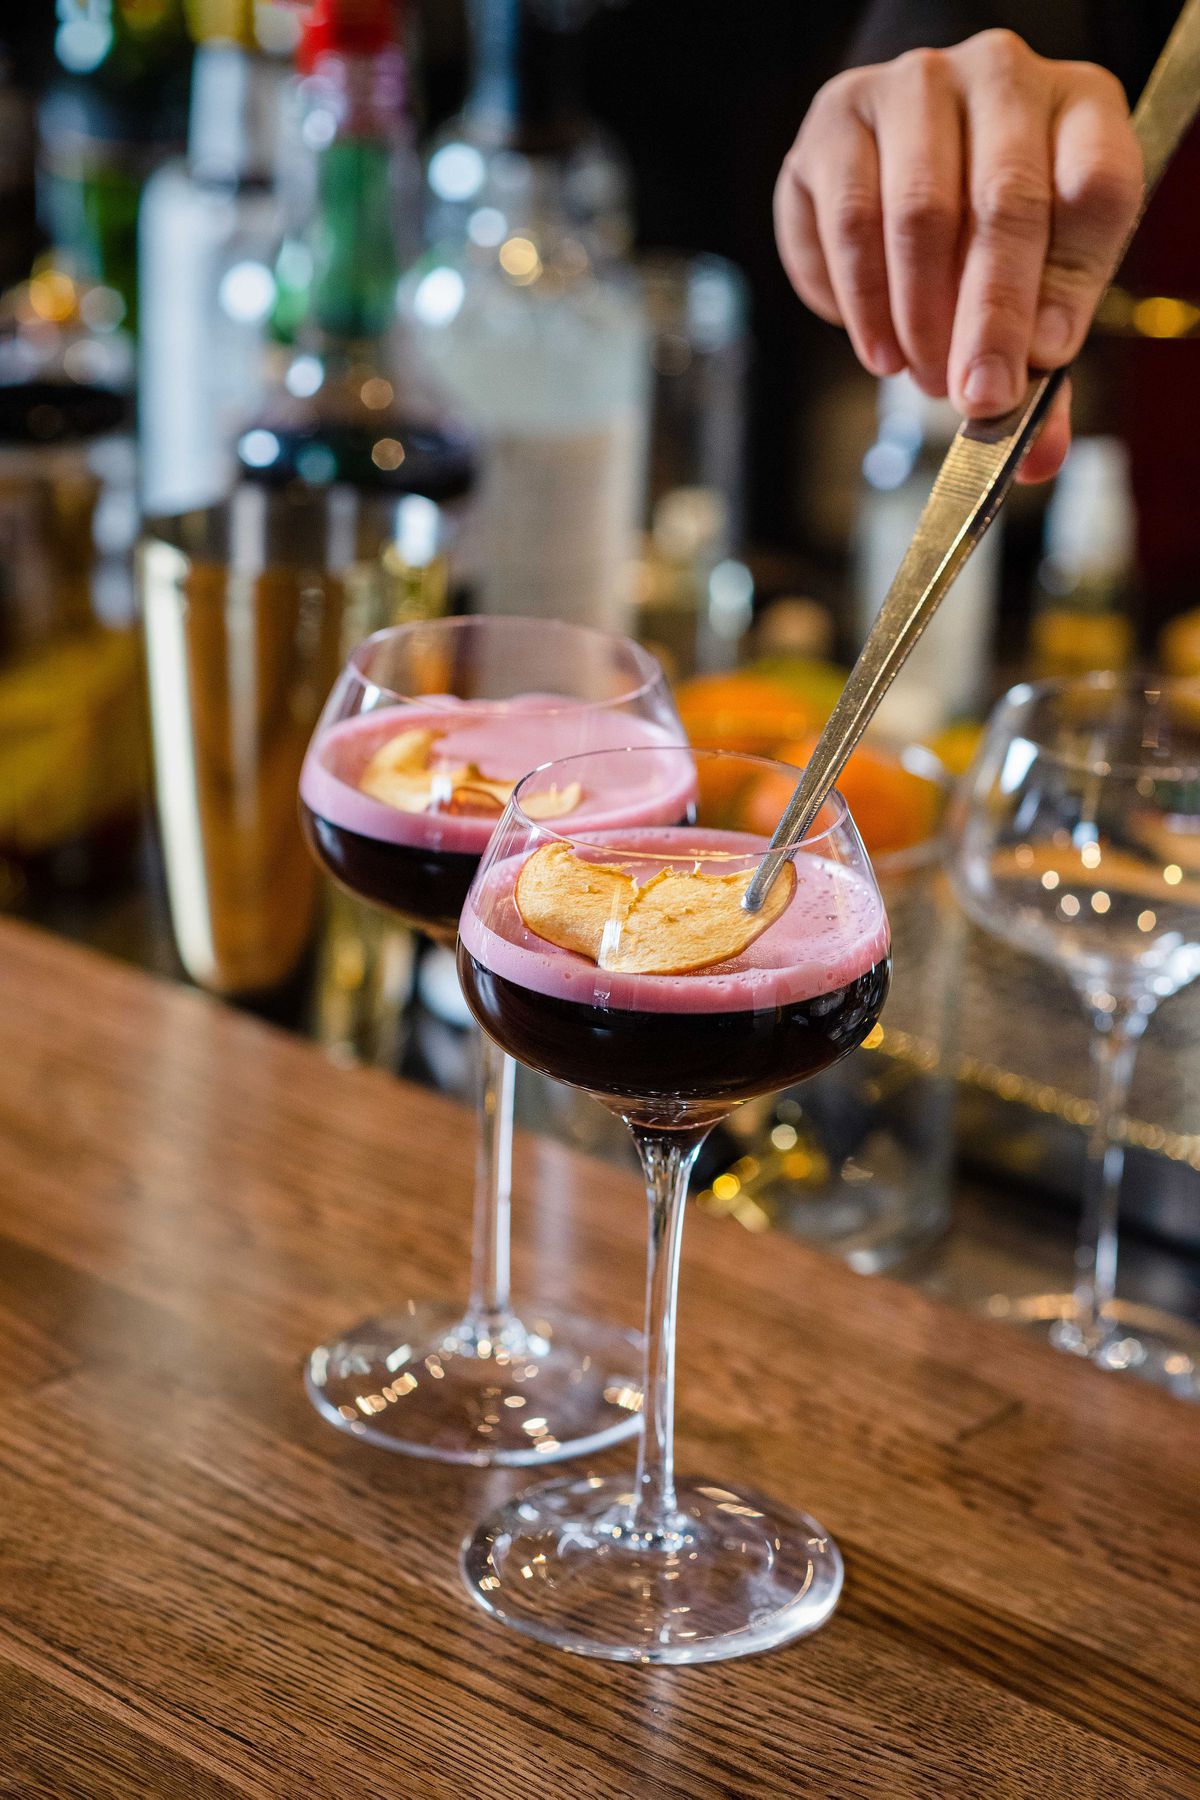 A bartender places a dried apple garnish on top of a purple cocktail.